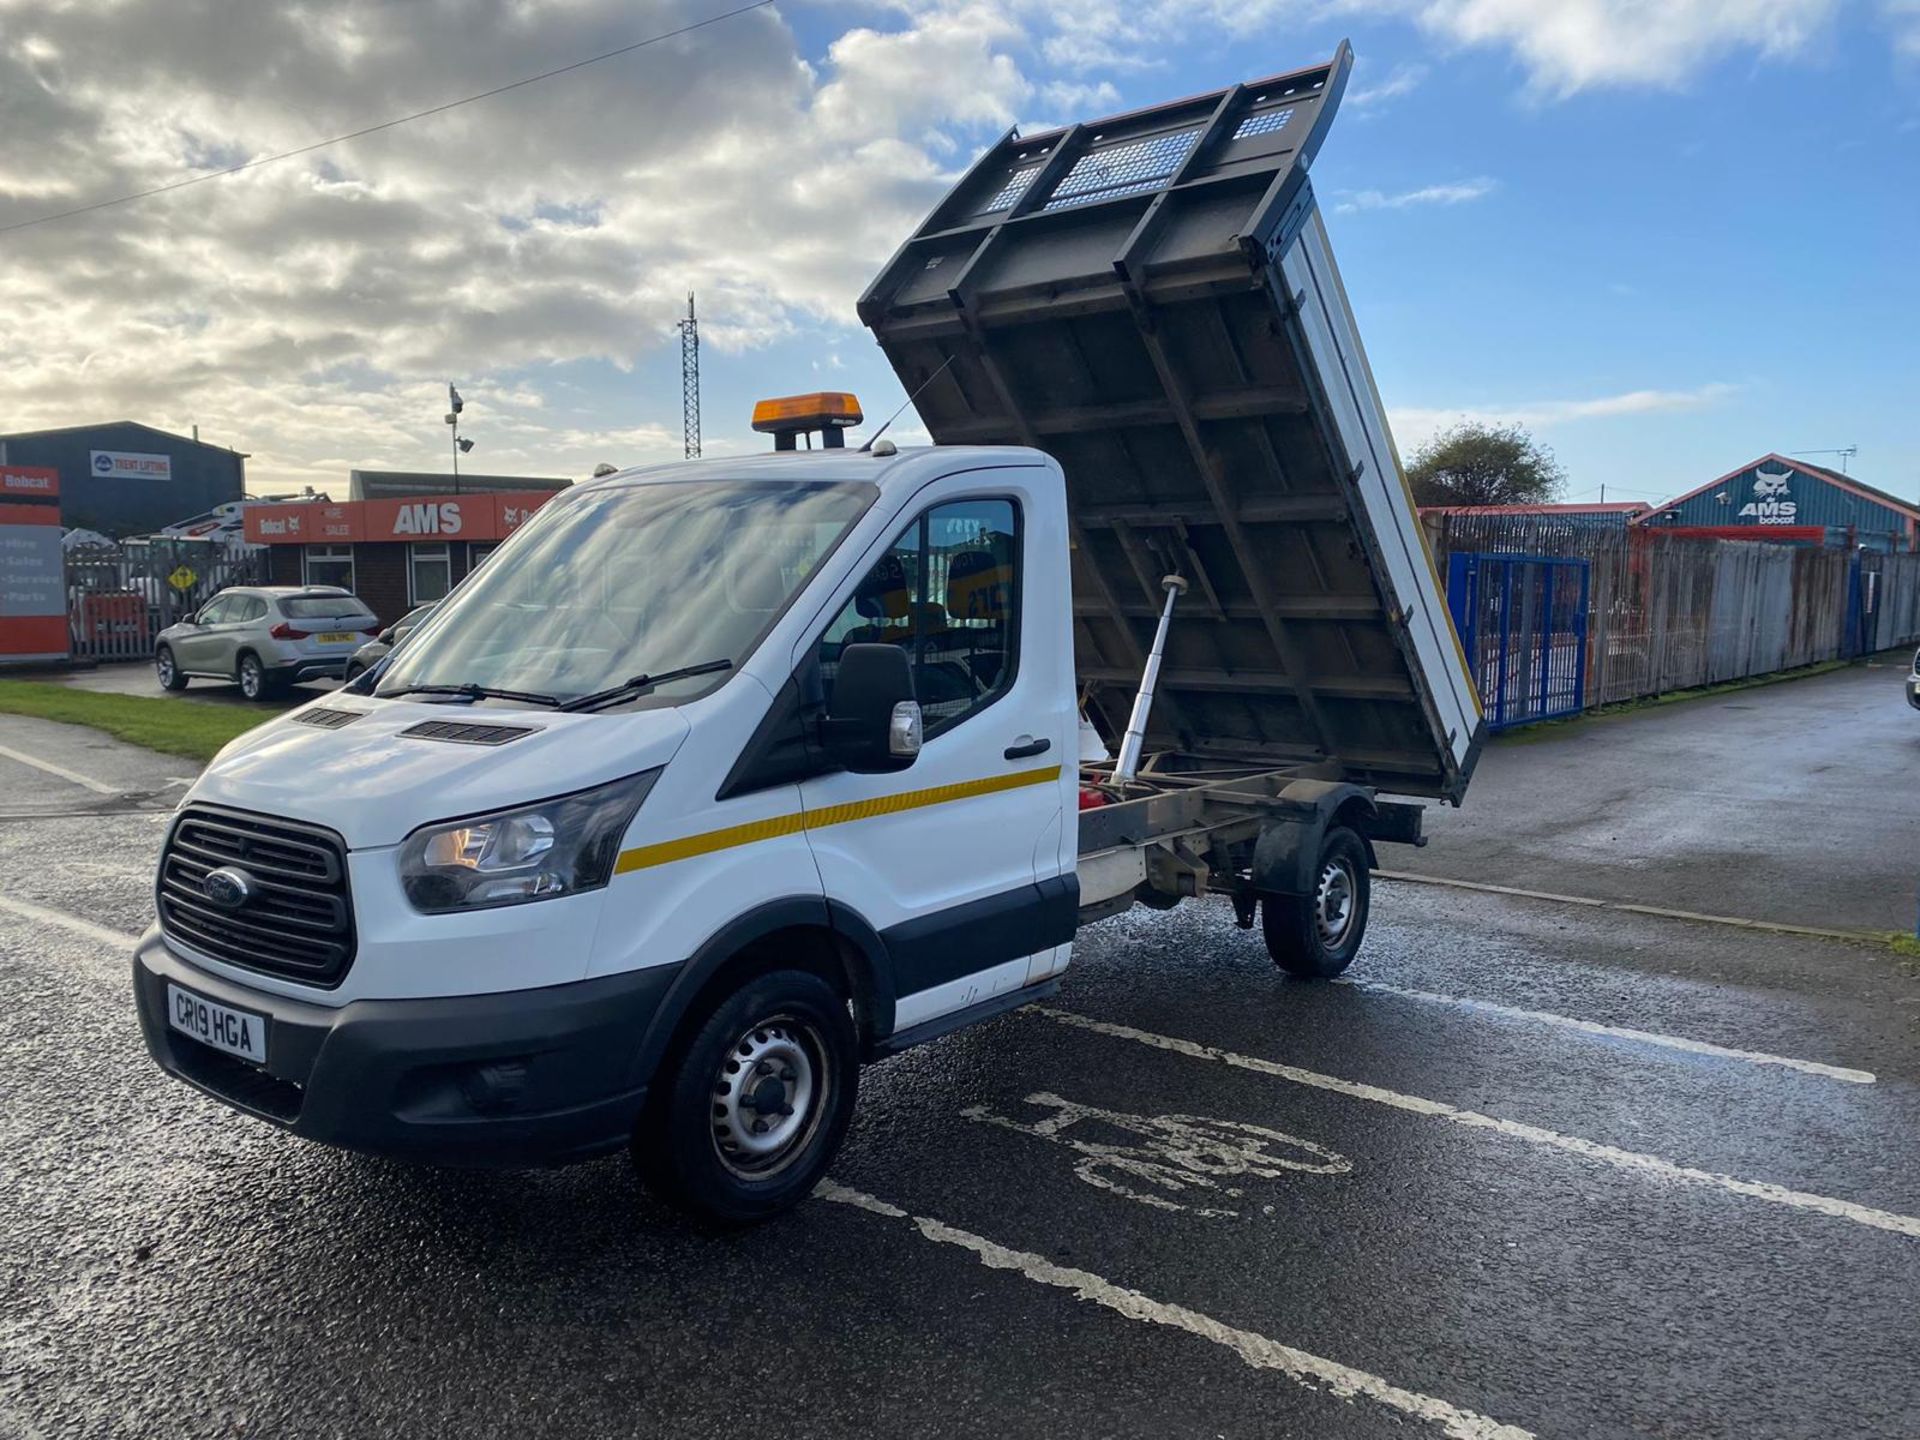 2019 19 FORD TRANSIT TIPPER - 83K MILES - FACTORY TIPPER - EURO 6. - Image 3 of 10